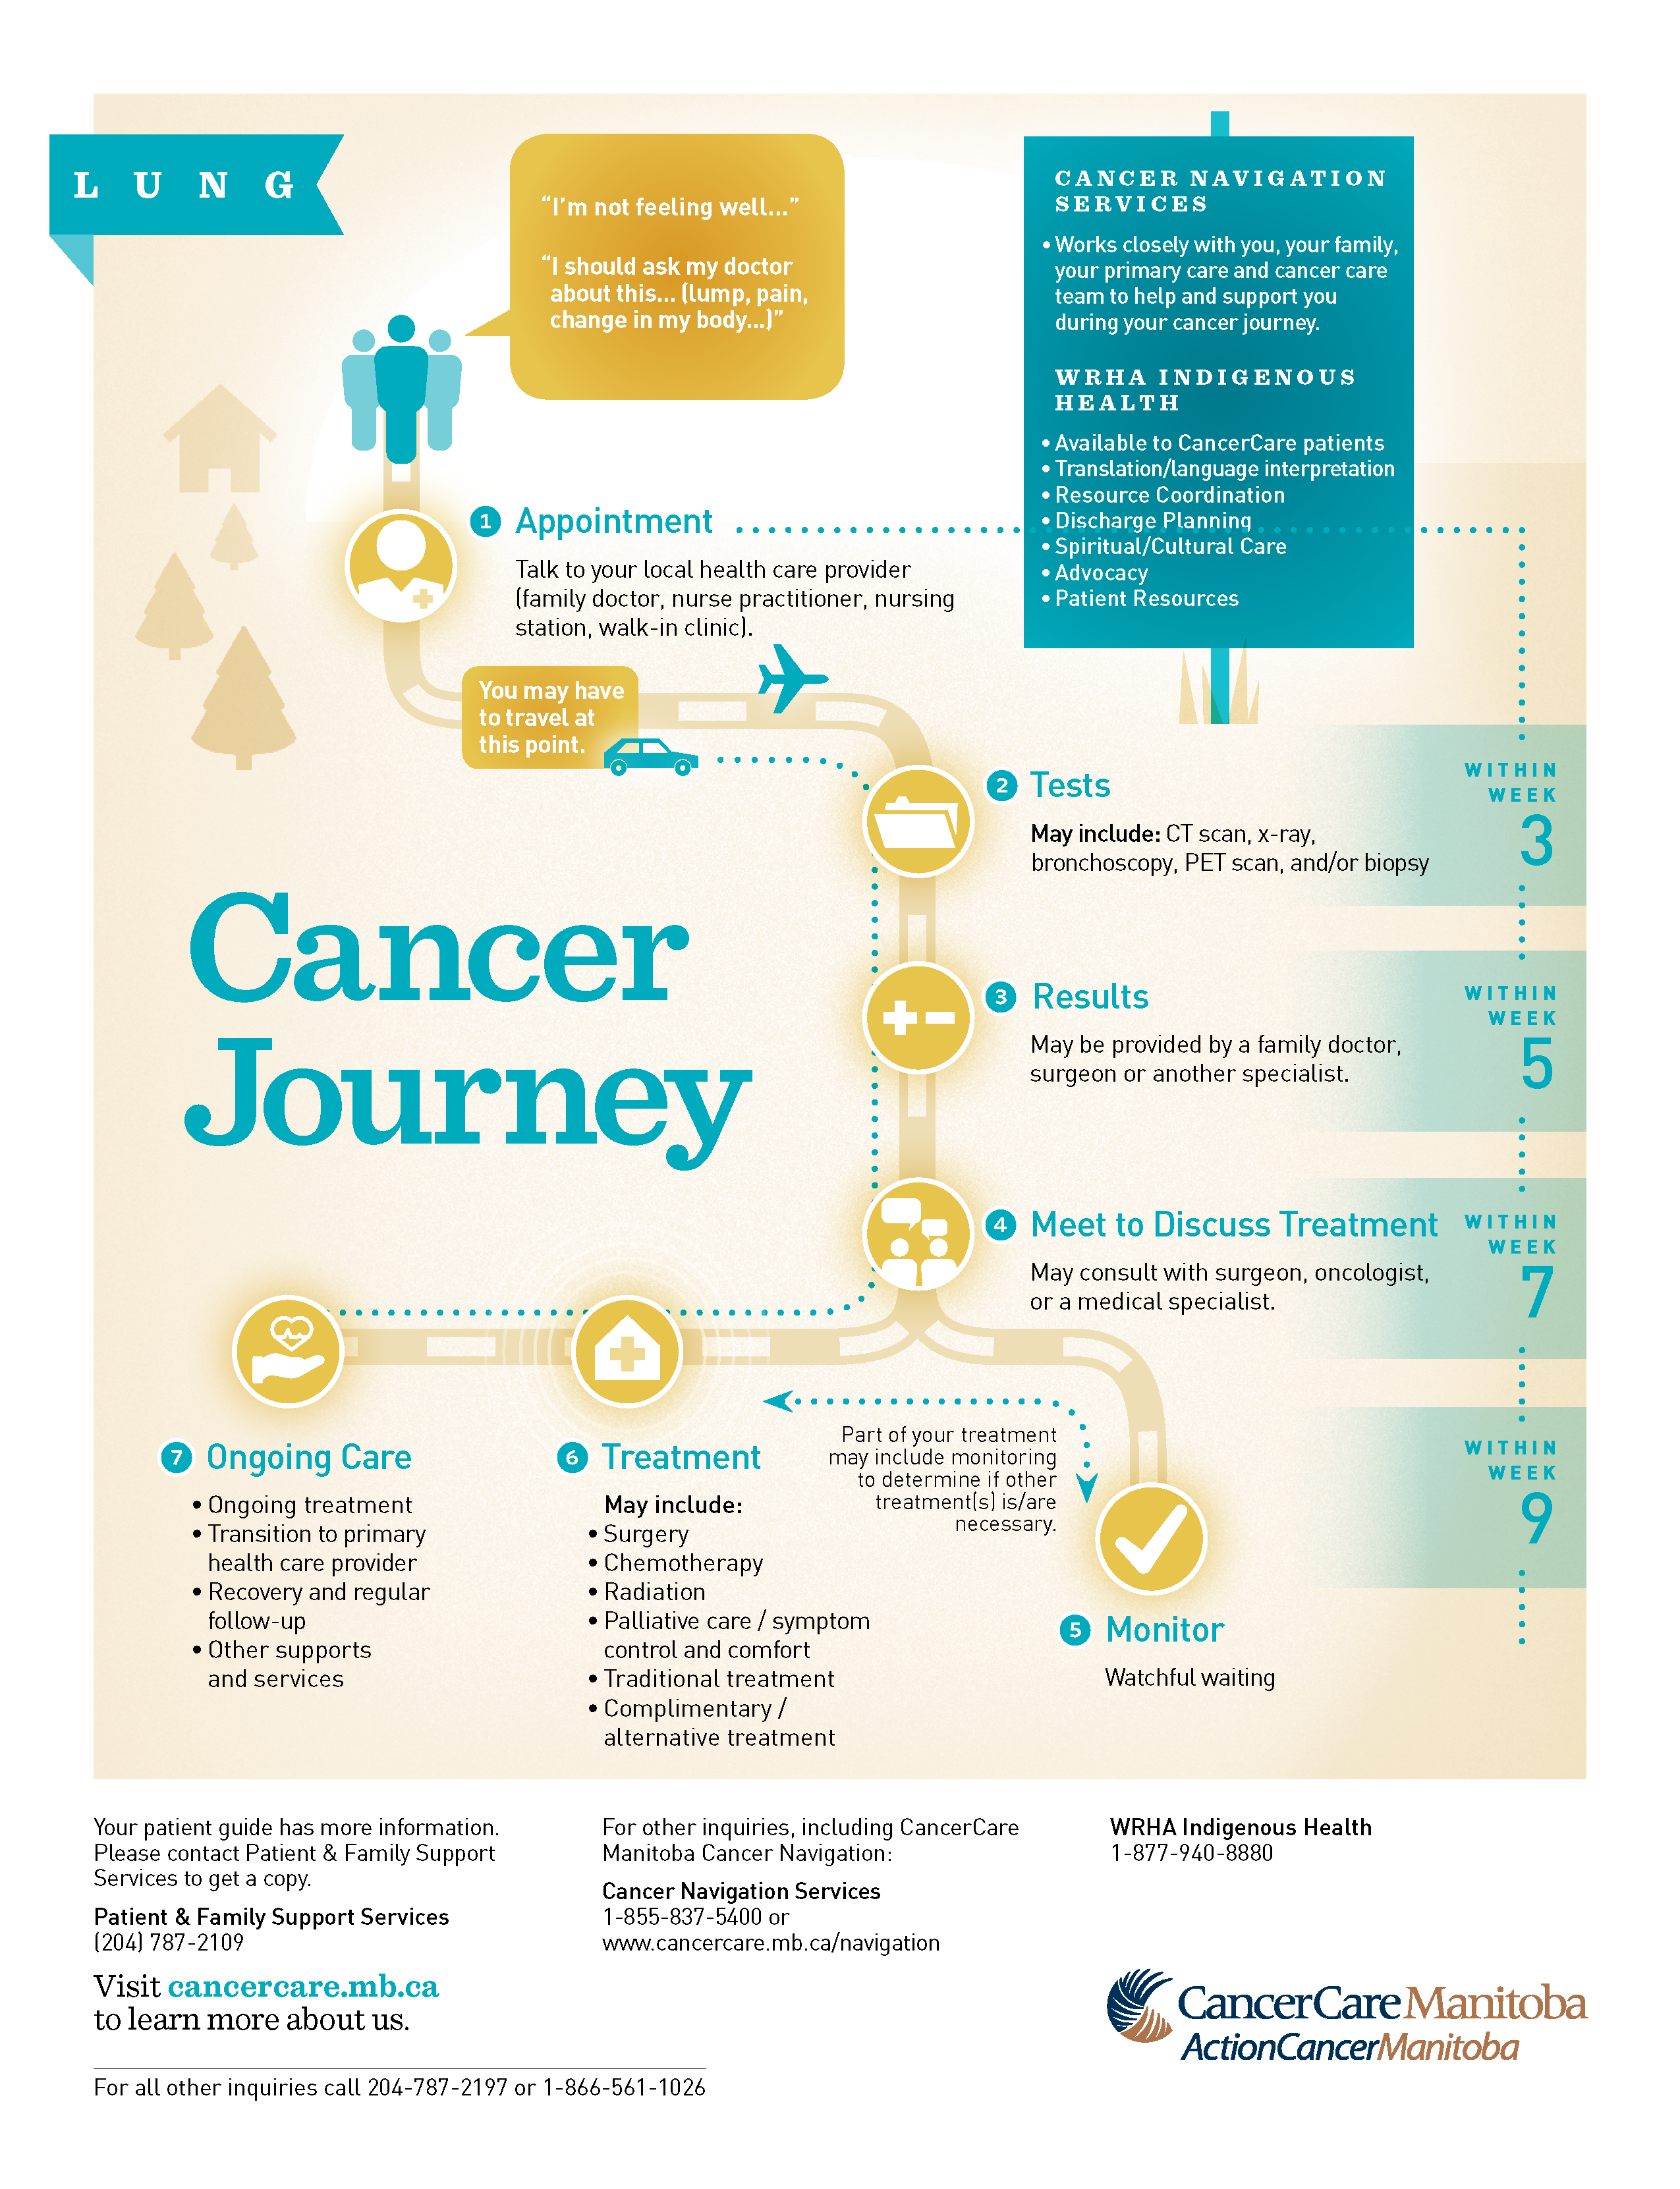 Infographic of the Lung Cancer Journey Patient Pathway (c) CancerCare Manitoba